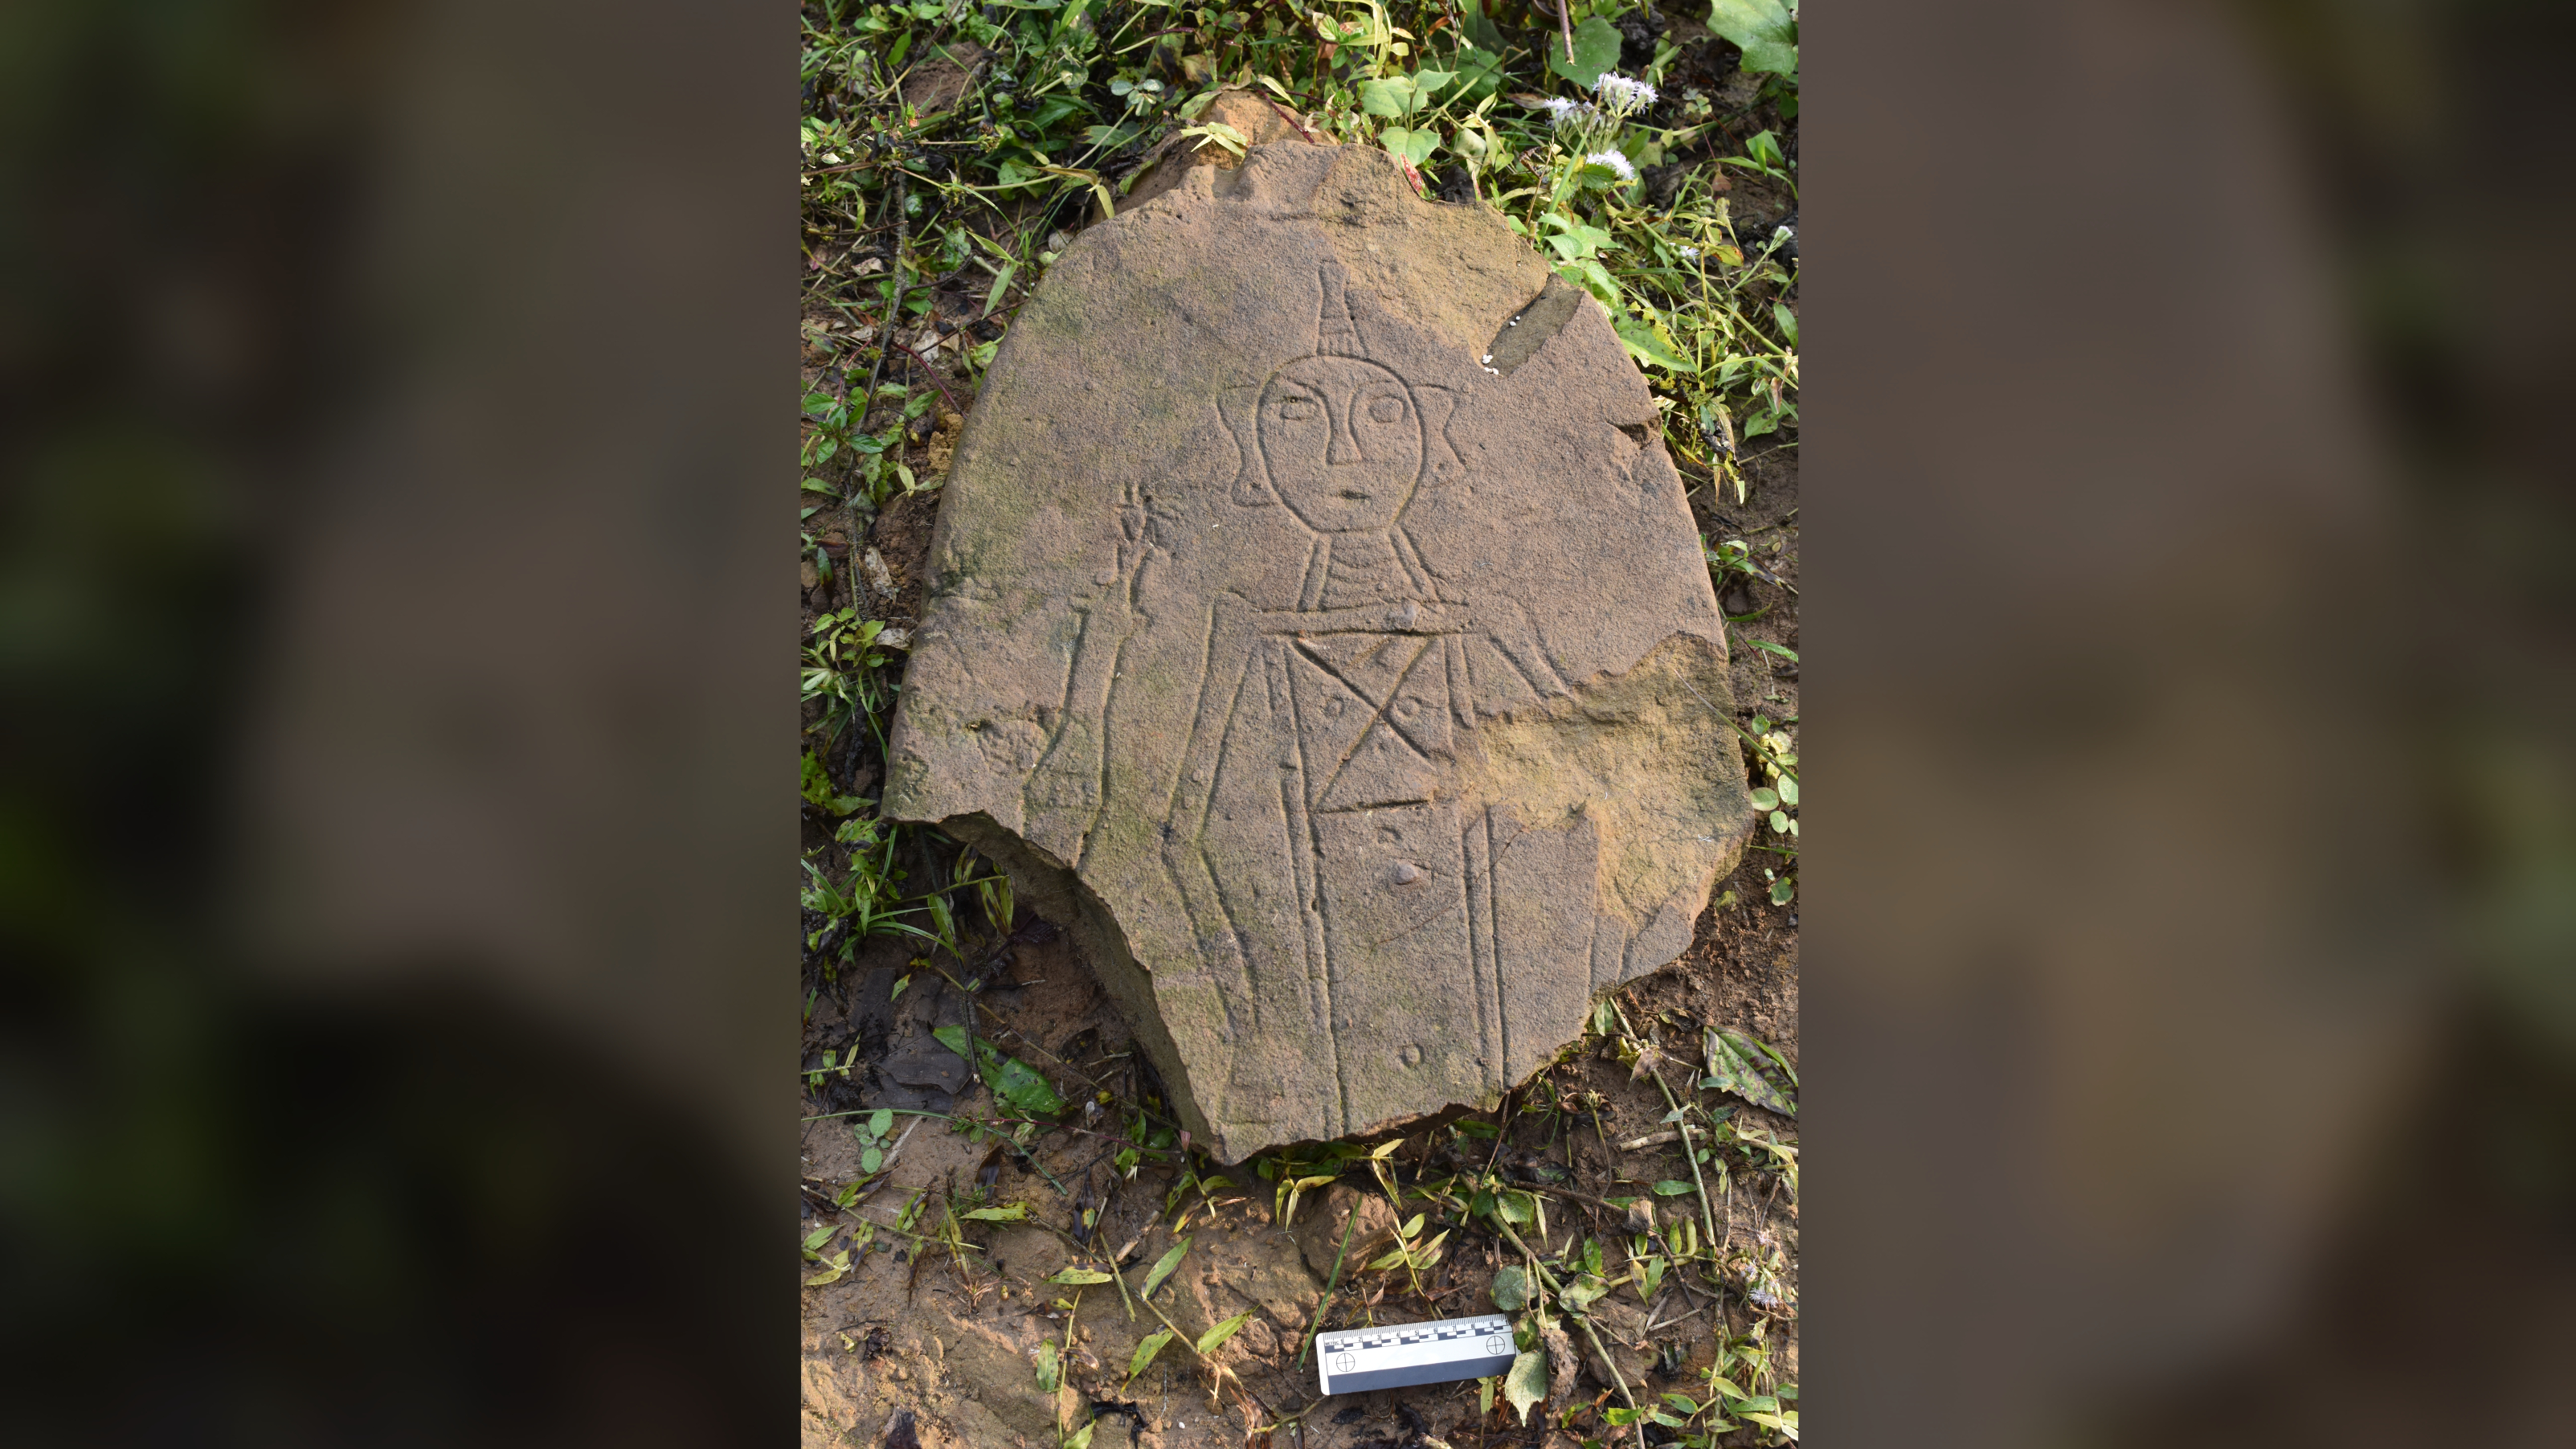 This carving on a curved stone was found at one of the stone jar sites. Although some of the jars are carved with geometric designs, carved portraits like this have been found nowhere else.